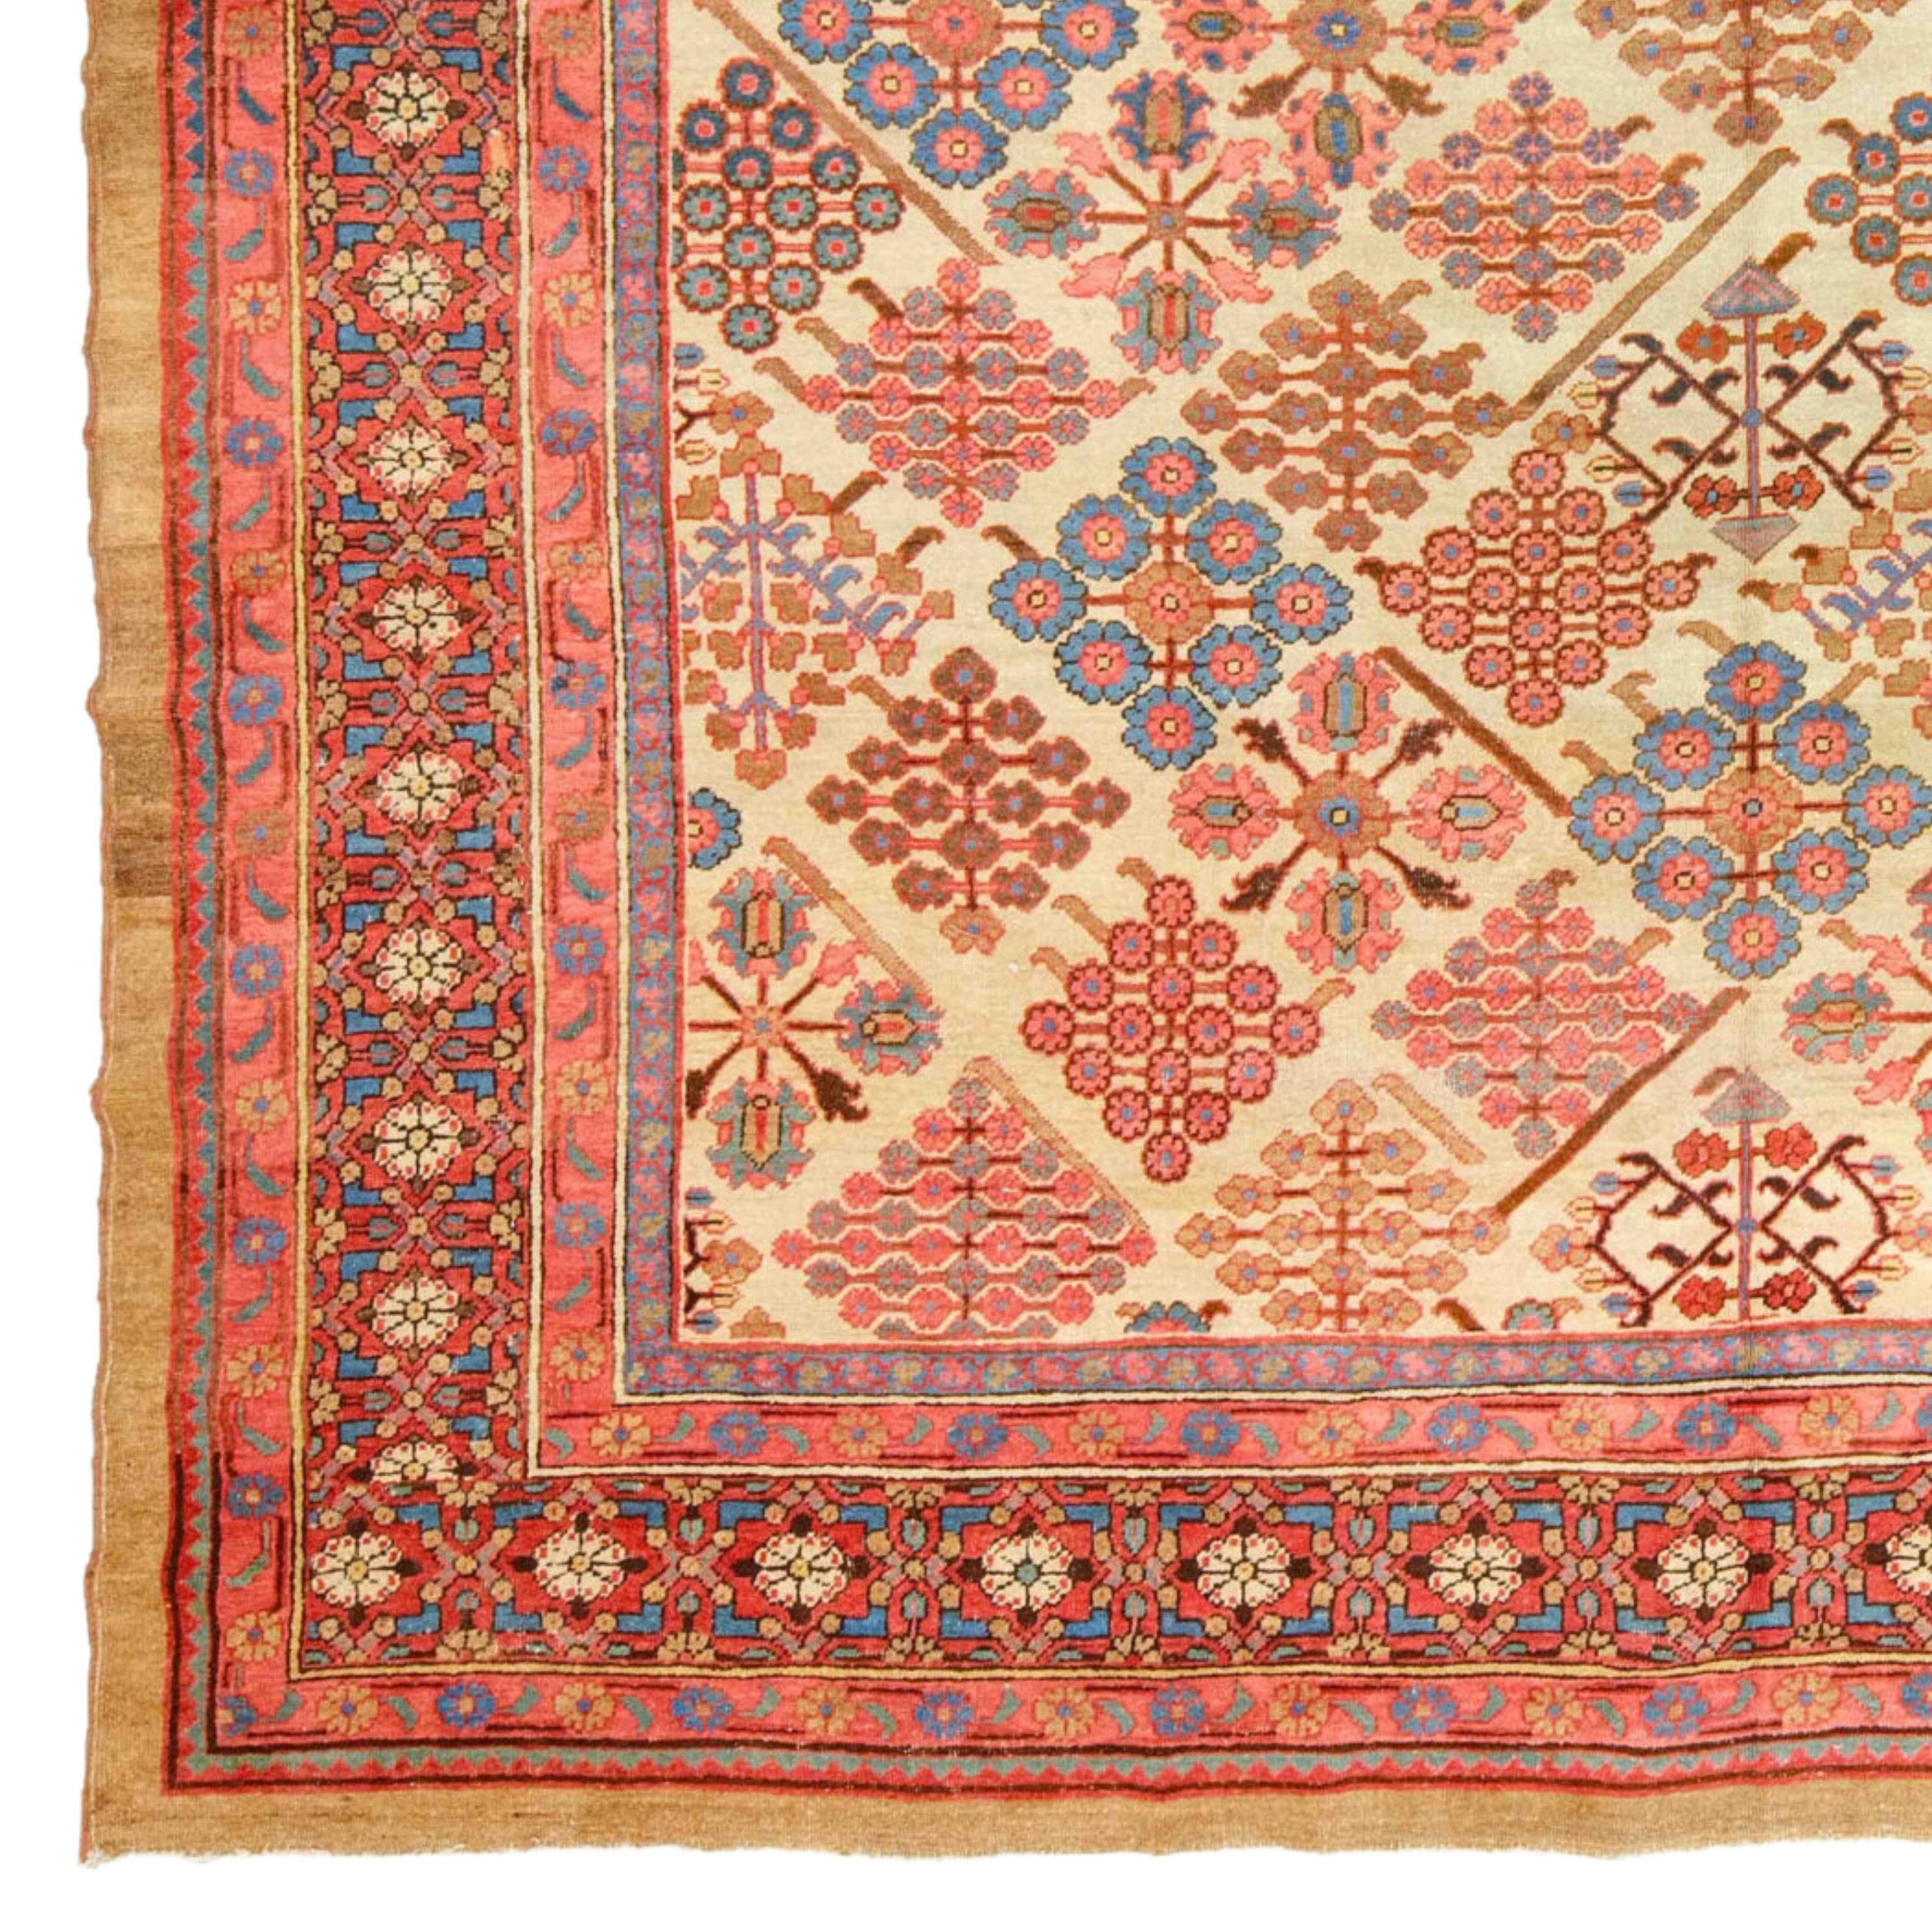 Late of the 19th Century Bakshaish Rug
Size: 345x435 cm

This impressive late 19th-century Bakshaish Tapestry is a masterpiece reflecting the elegant and sophisticated craftsmanship of a historic period.

Rich Patterns: The carpet is decorated with